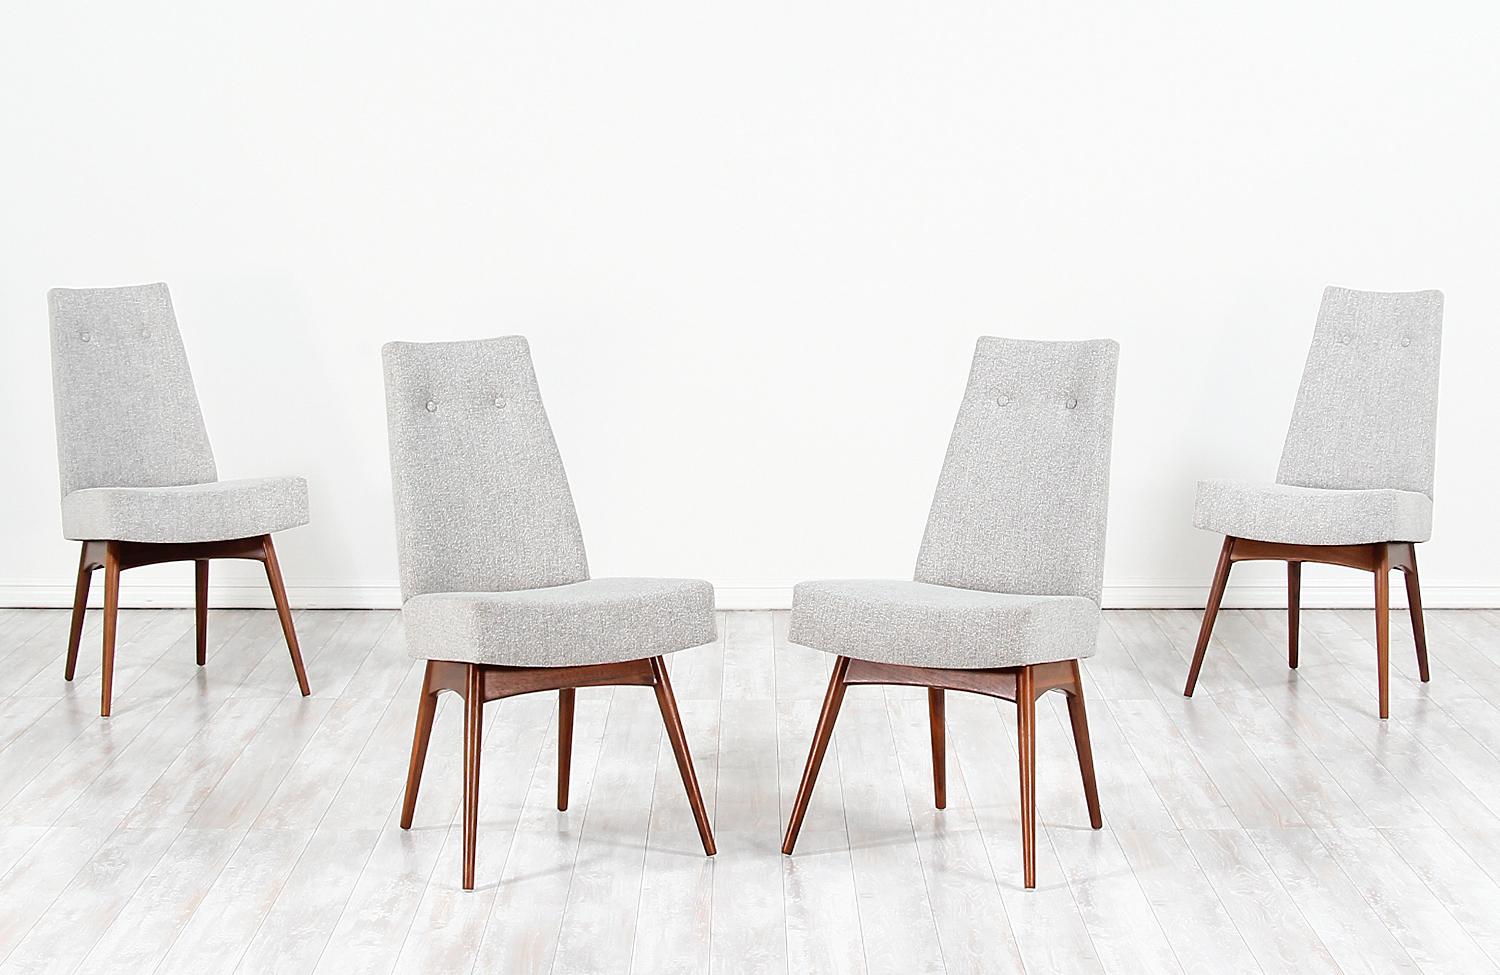 Set of four modern dining chairs model 1613-C designed by Adrian Pearsall for Craft Associates in the United States circa 1960s. This incredible set of model 1613-C dining chairs feature a sturdy walnut wood frame with new high-density foam and